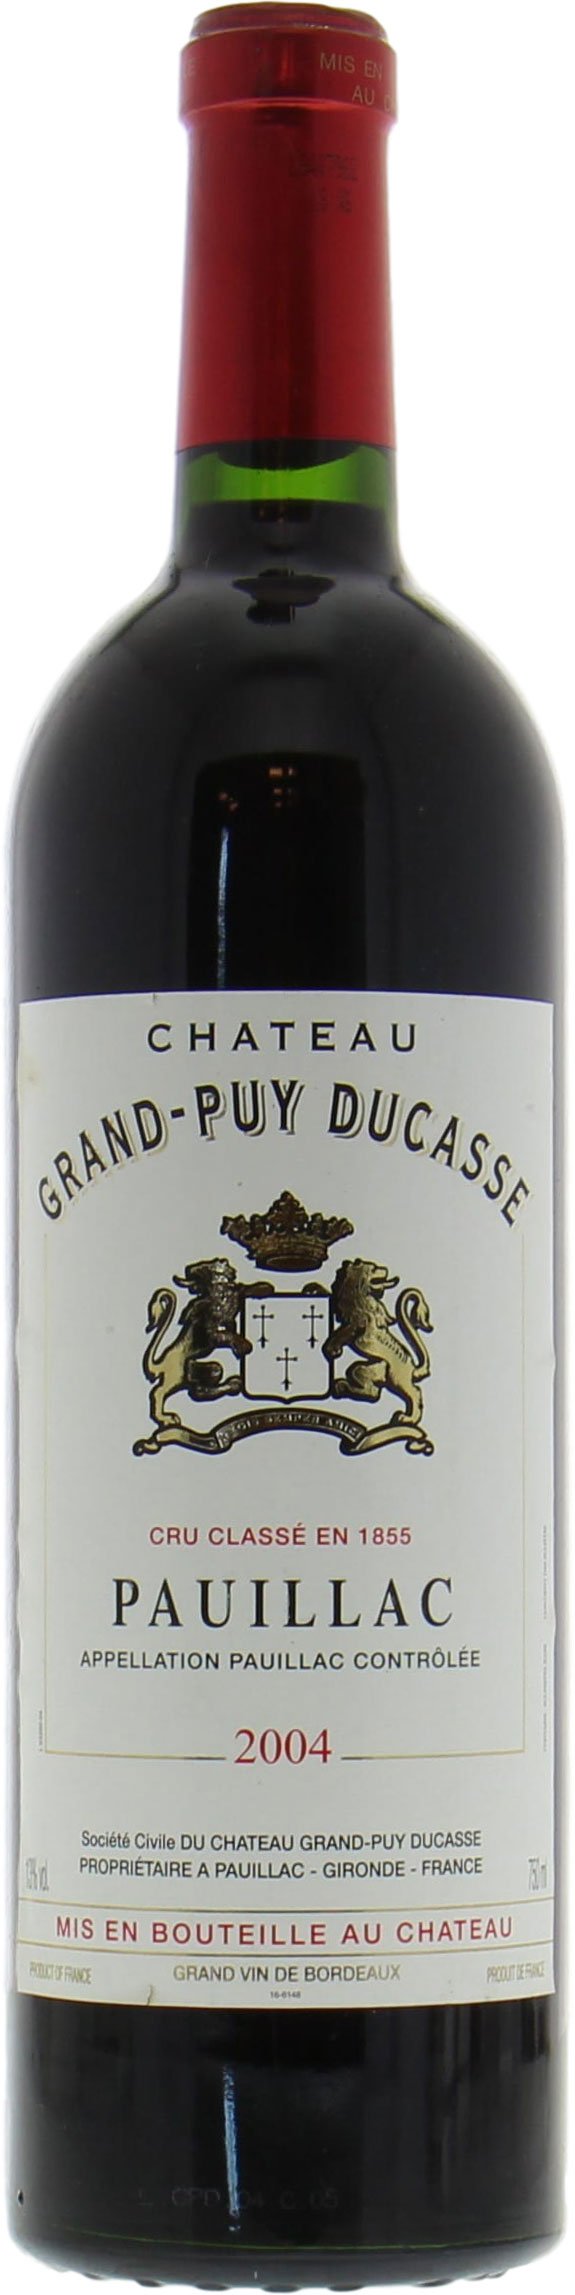 Chateau Grand Puy Ducasse - Chateau Grand Puy Ducasse 2004 Perfect